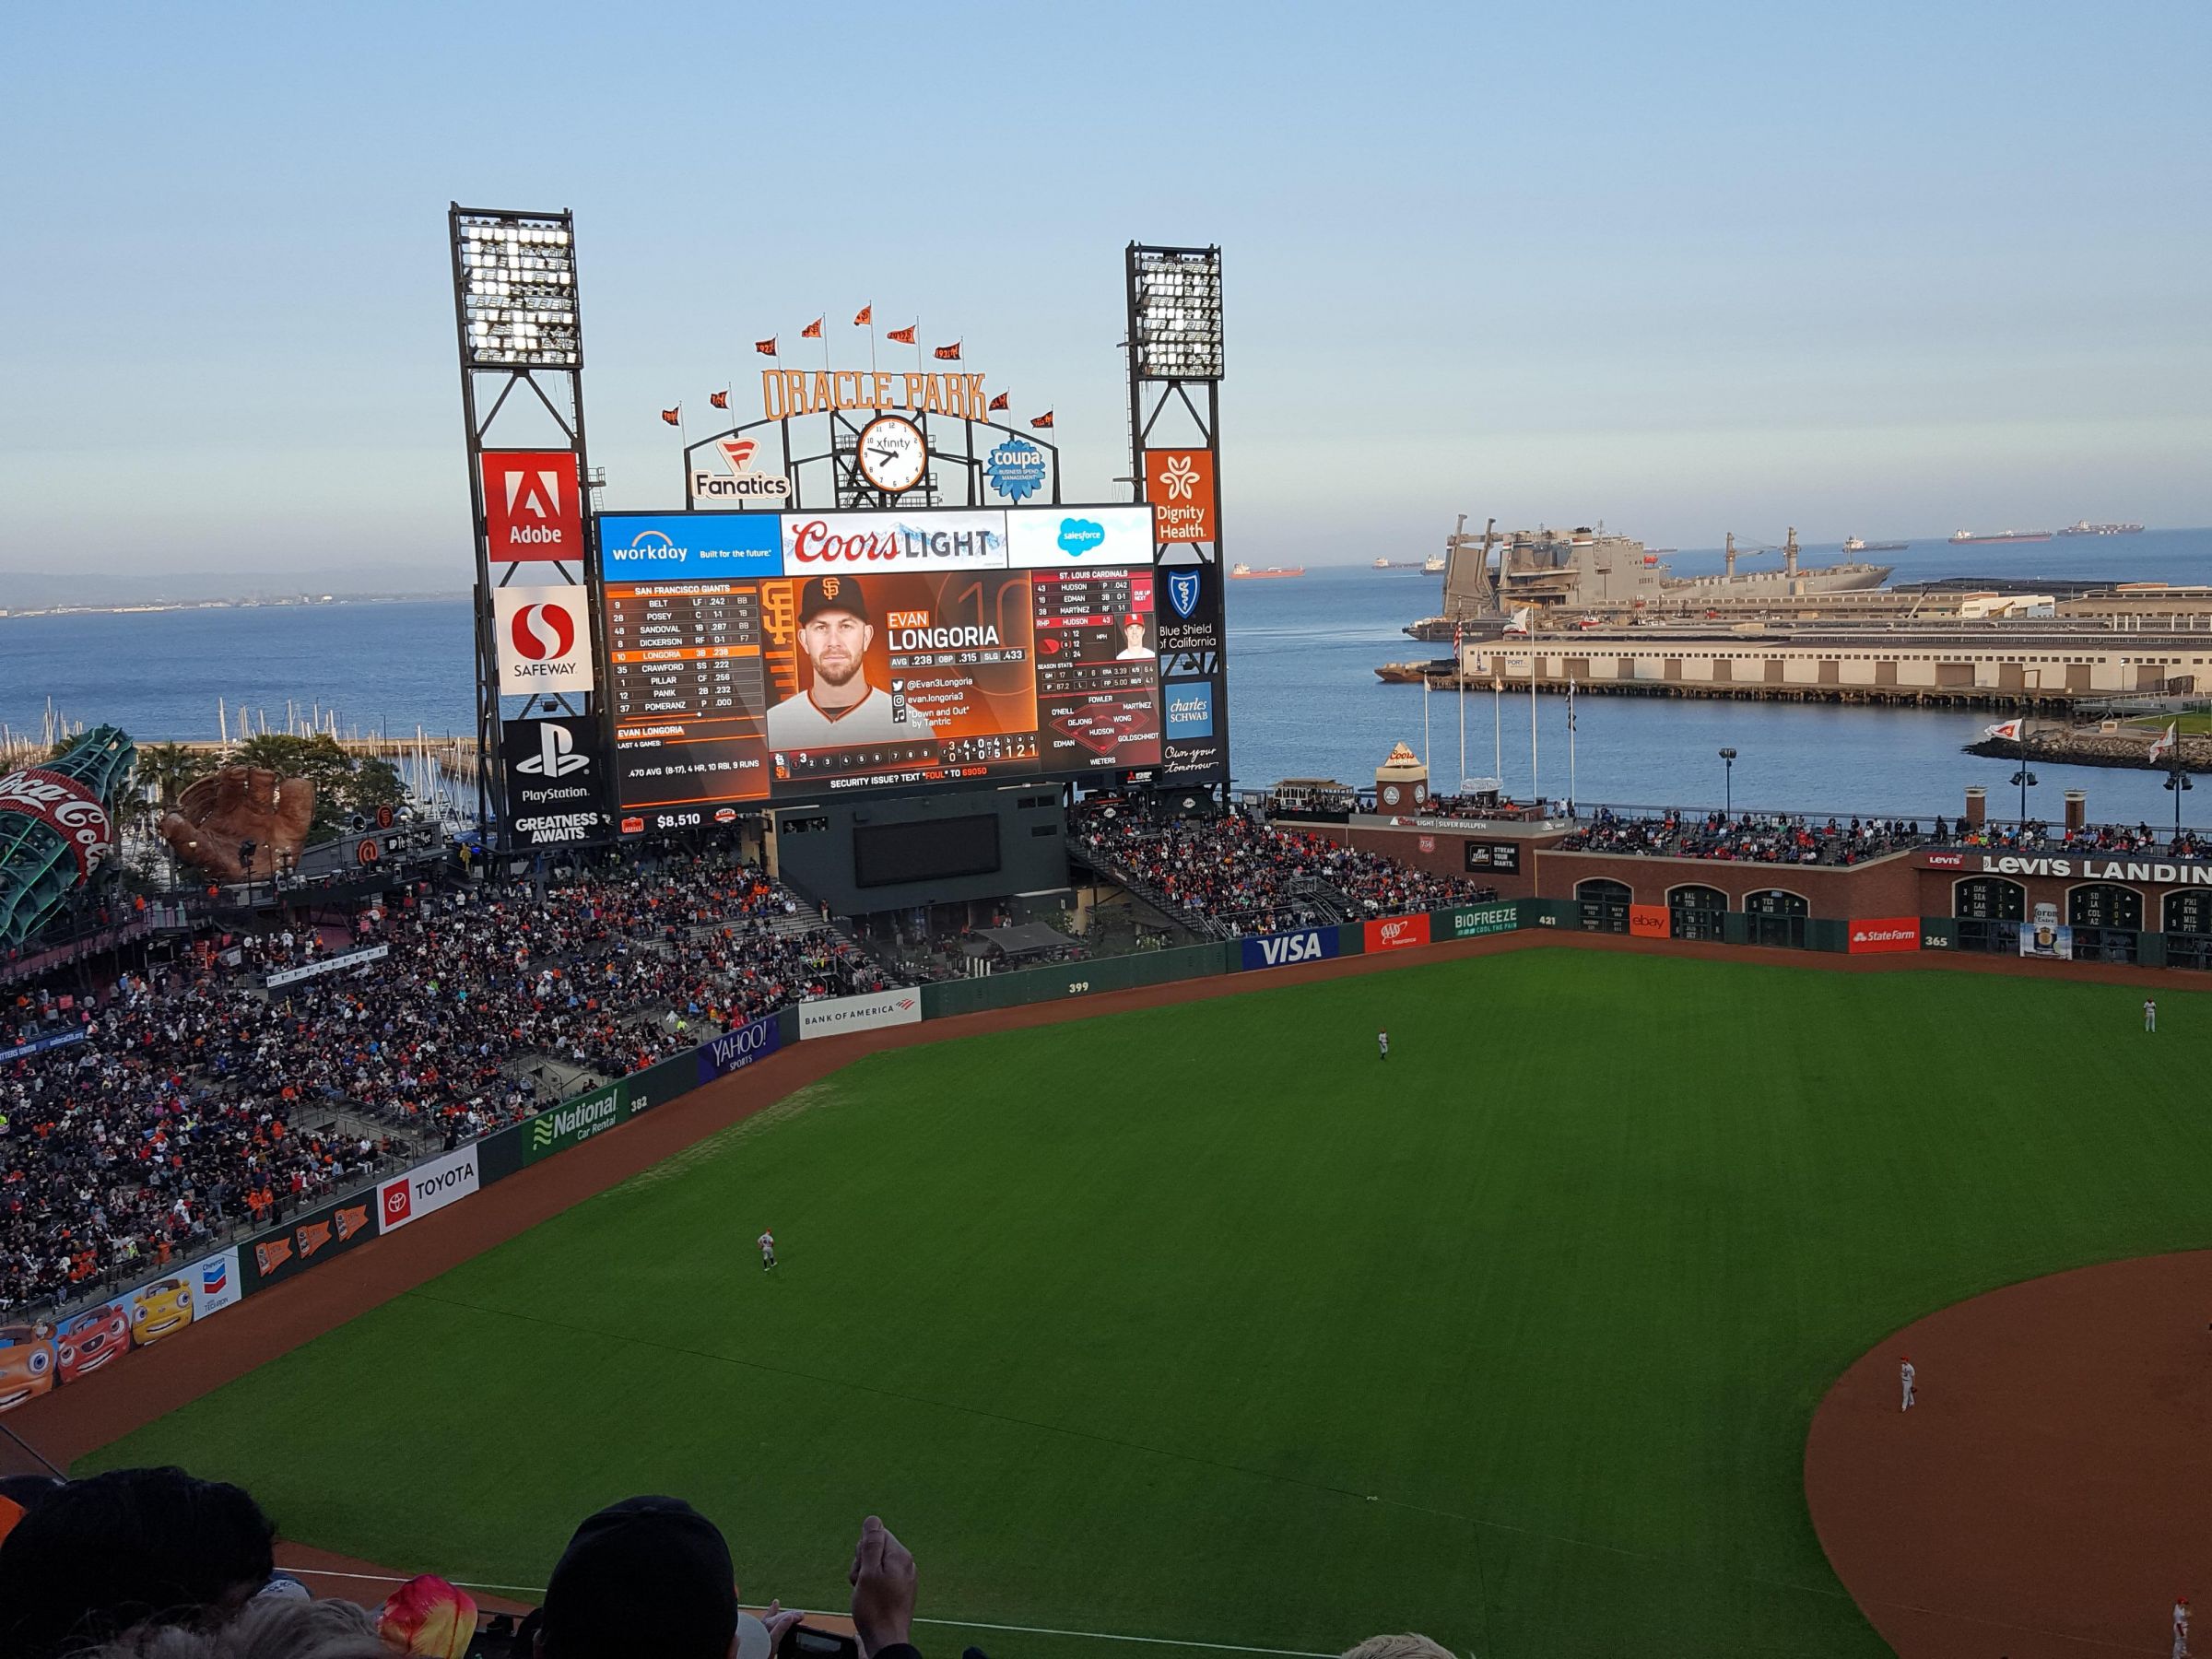 And the new outfield dimensions at Oracle Park will be . . .